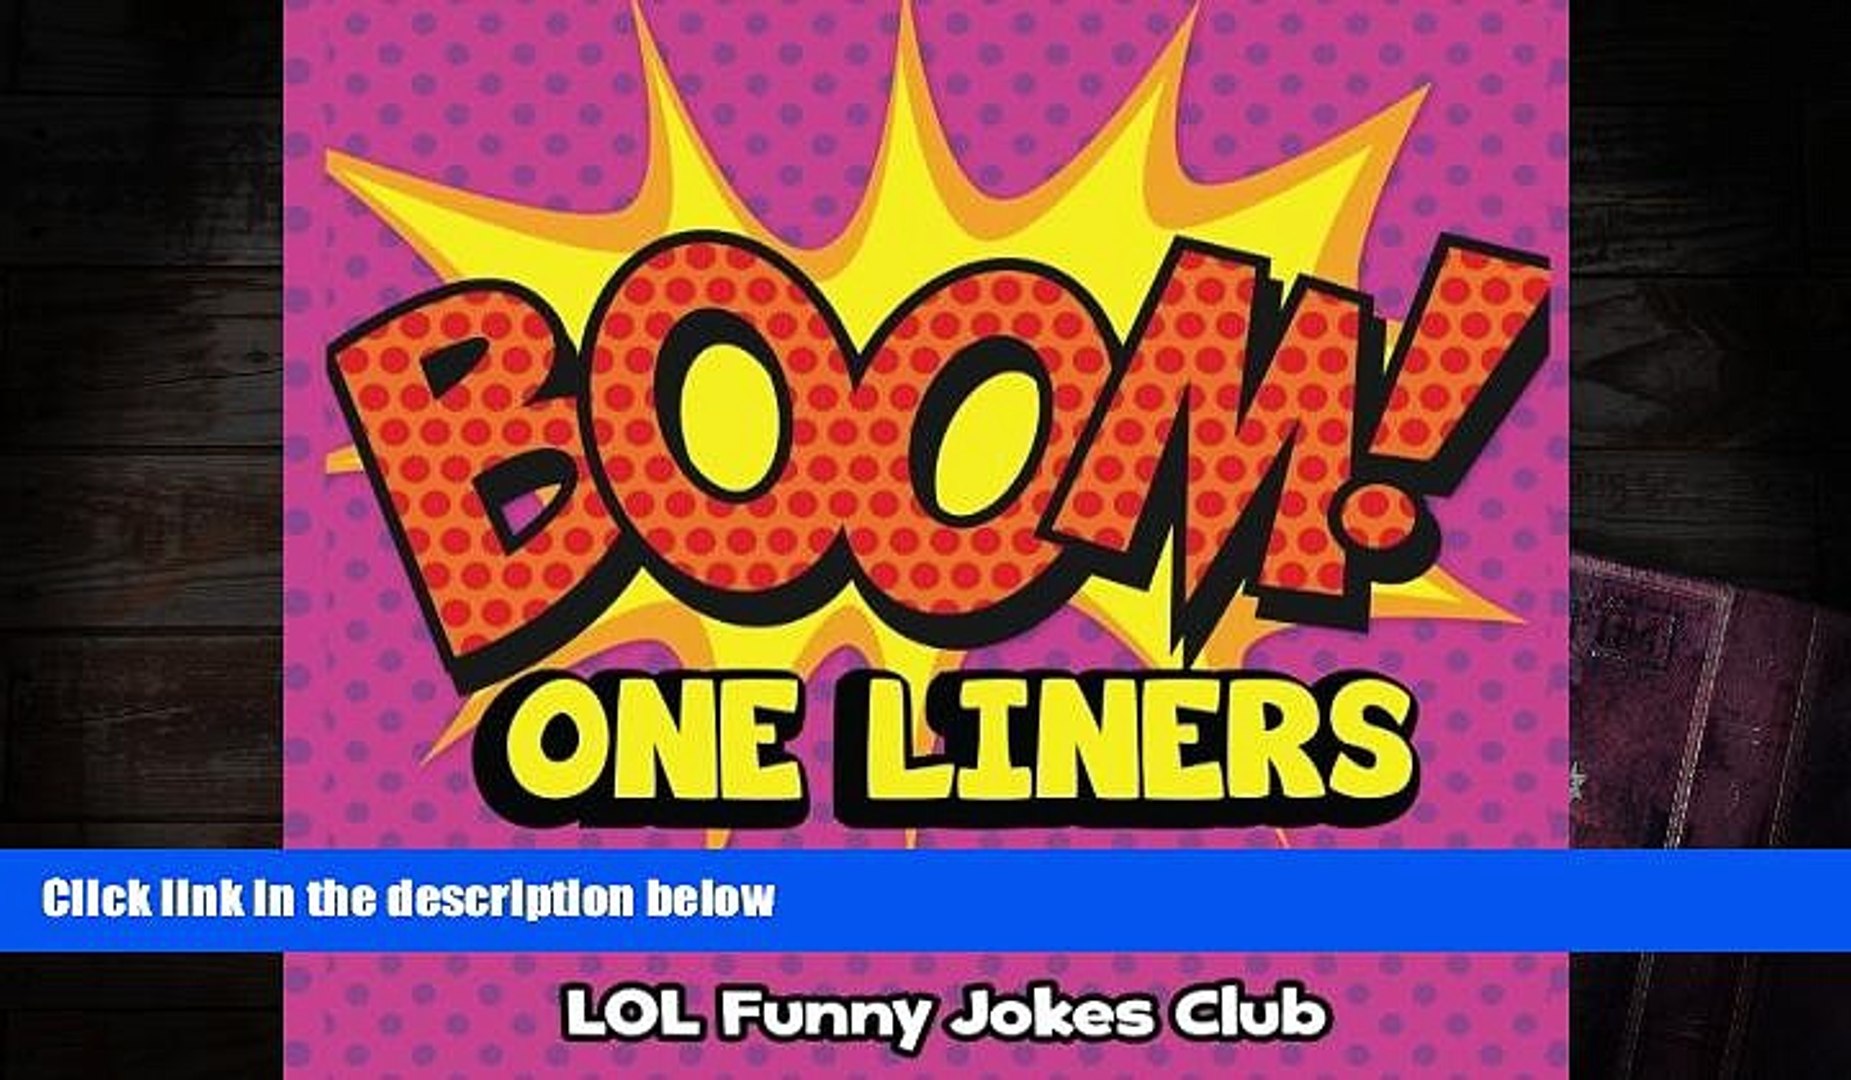 Liners party jokes one One Liner